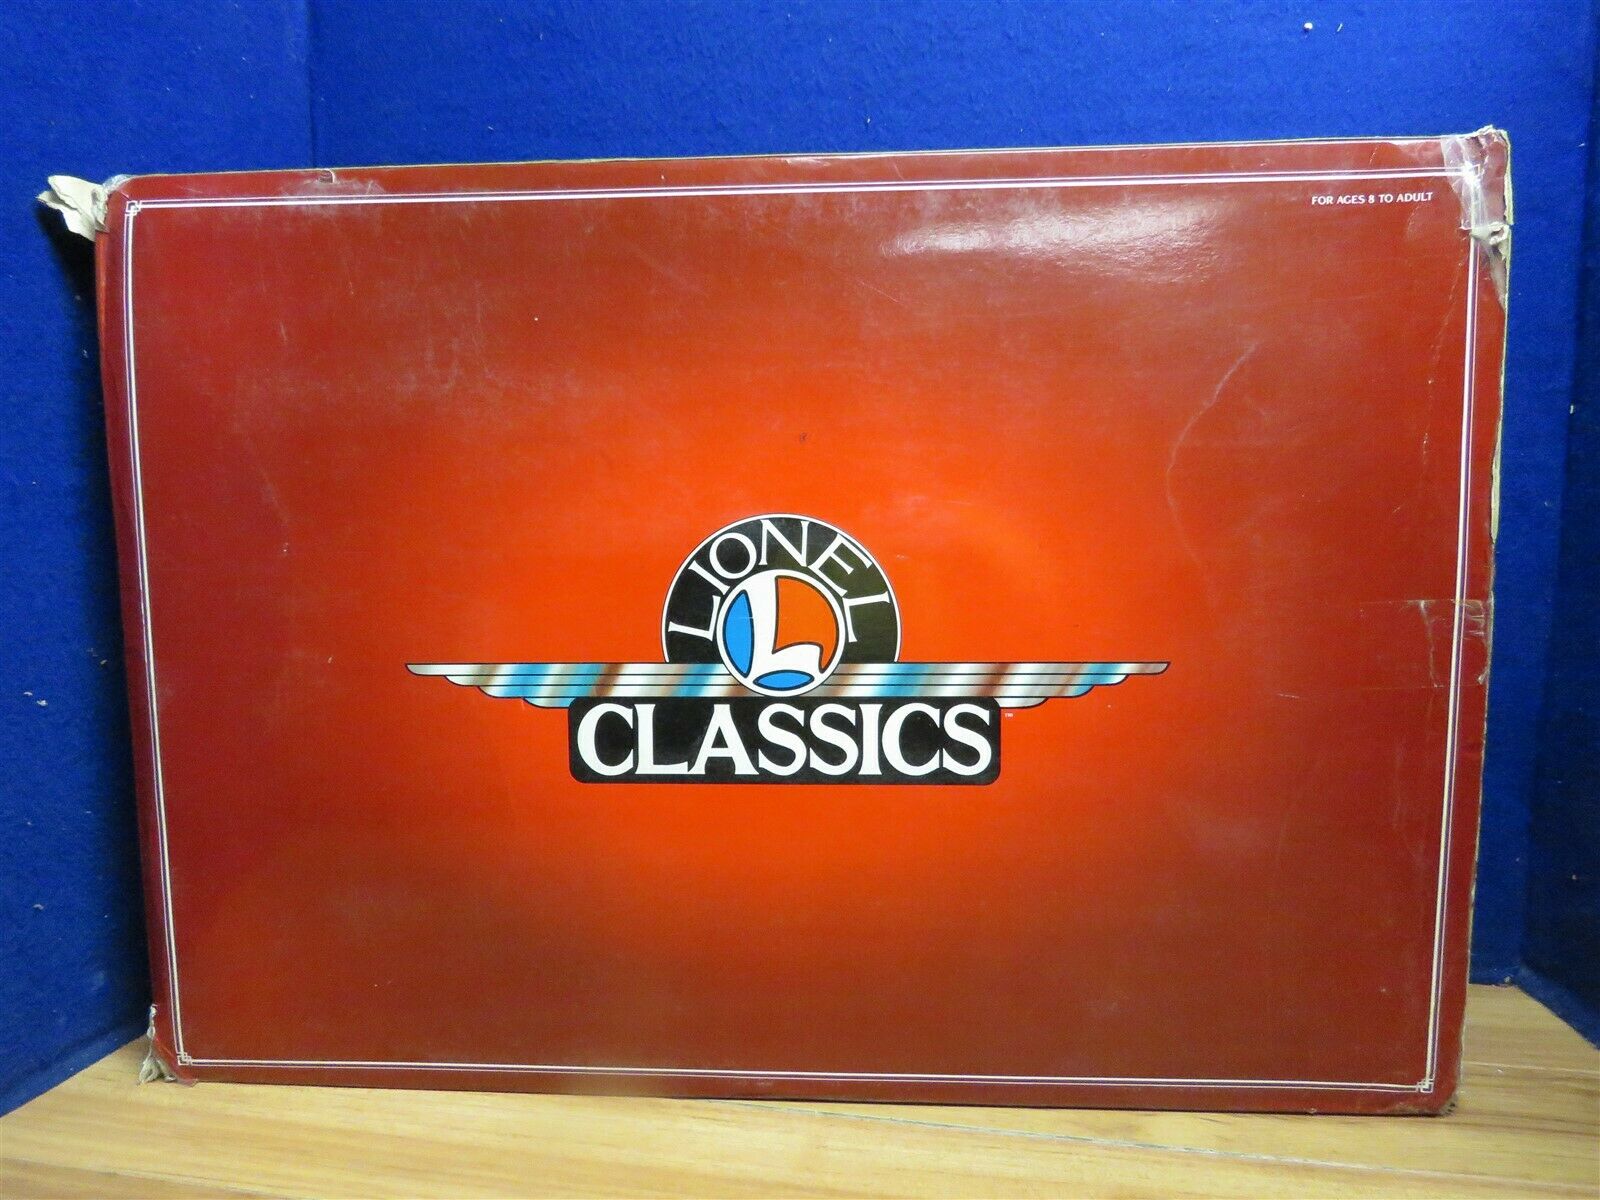 Lionel Standard Classics 1-318 Freight Set Box Only 592102